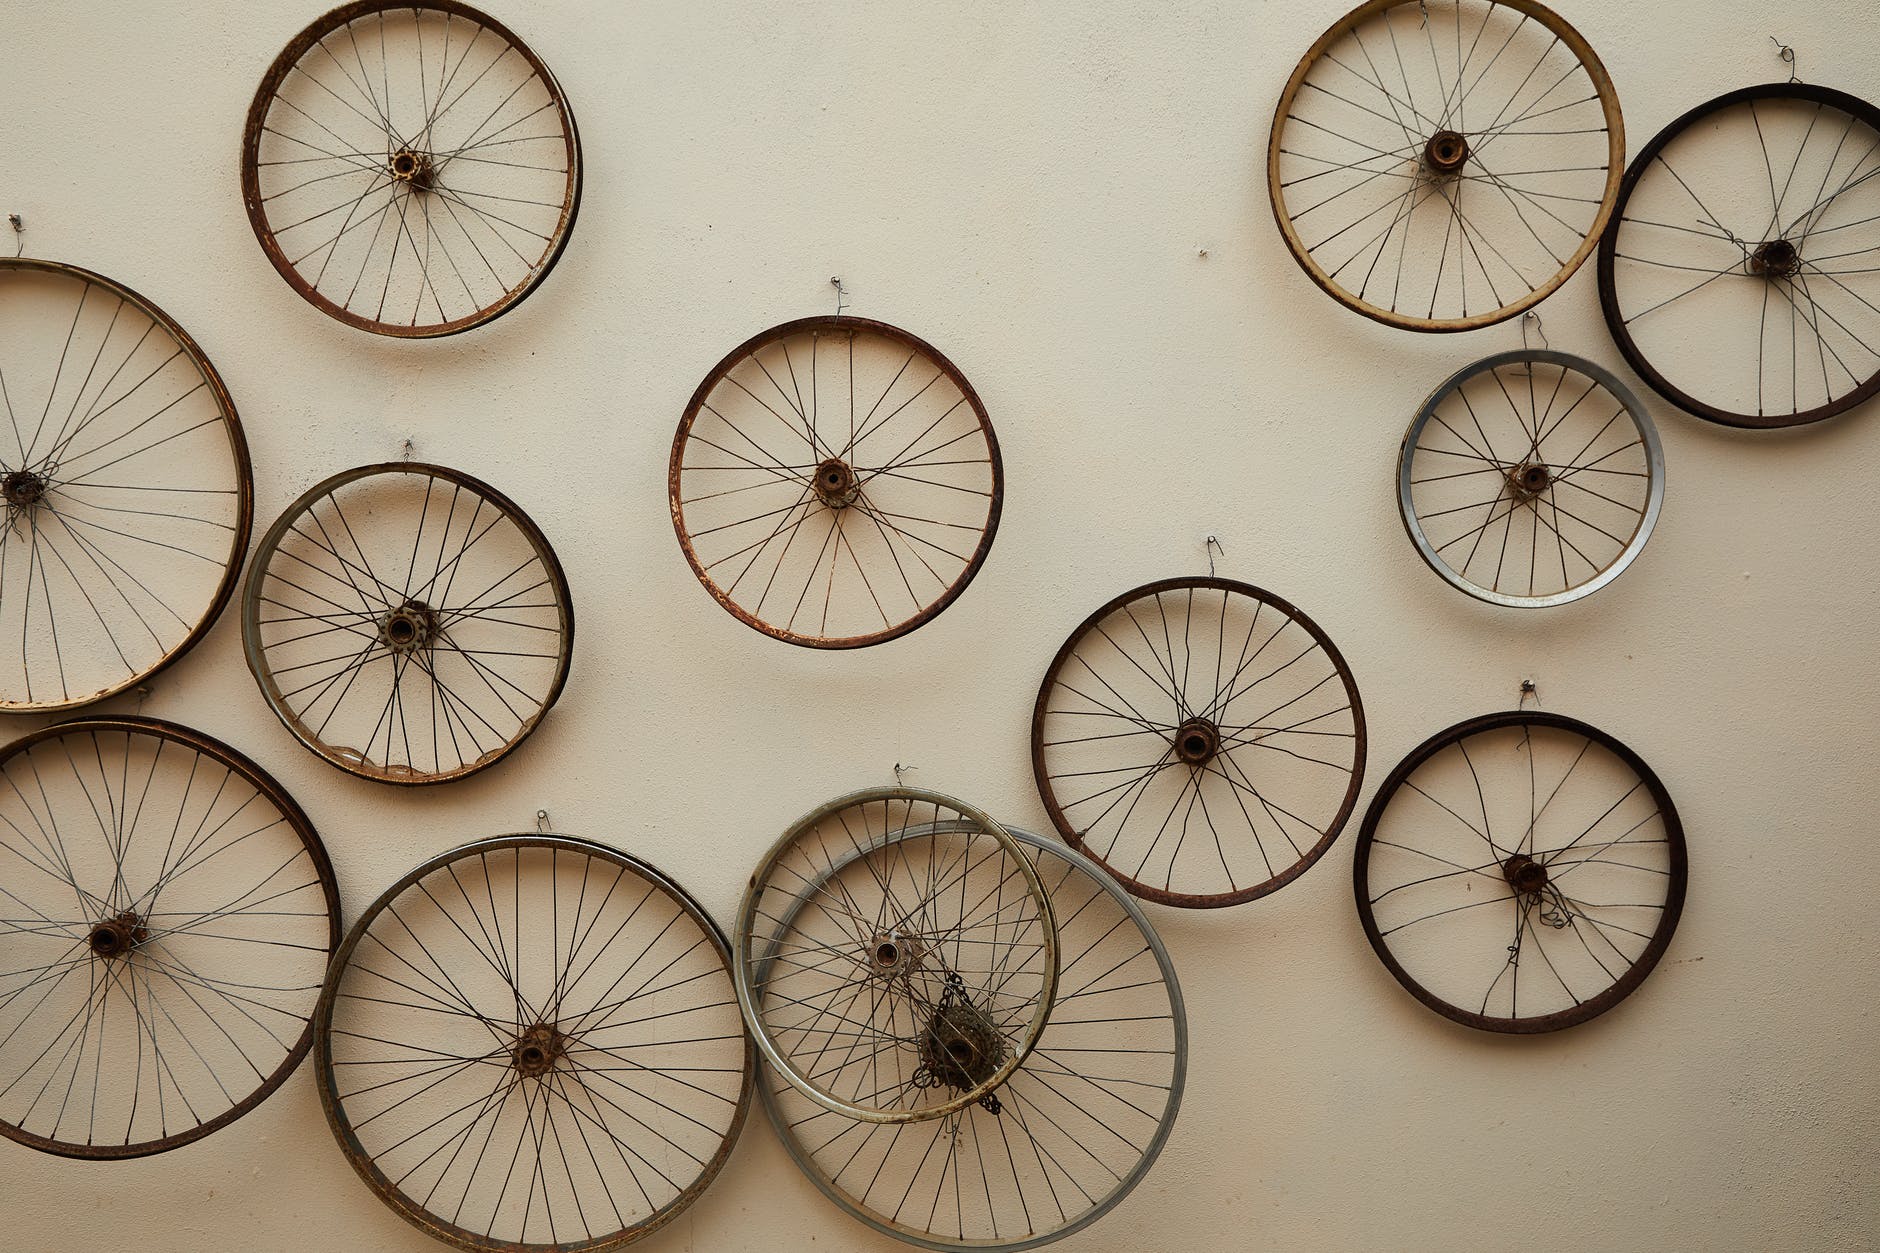 different shapes and sizes spoke wheels hanging on light wall